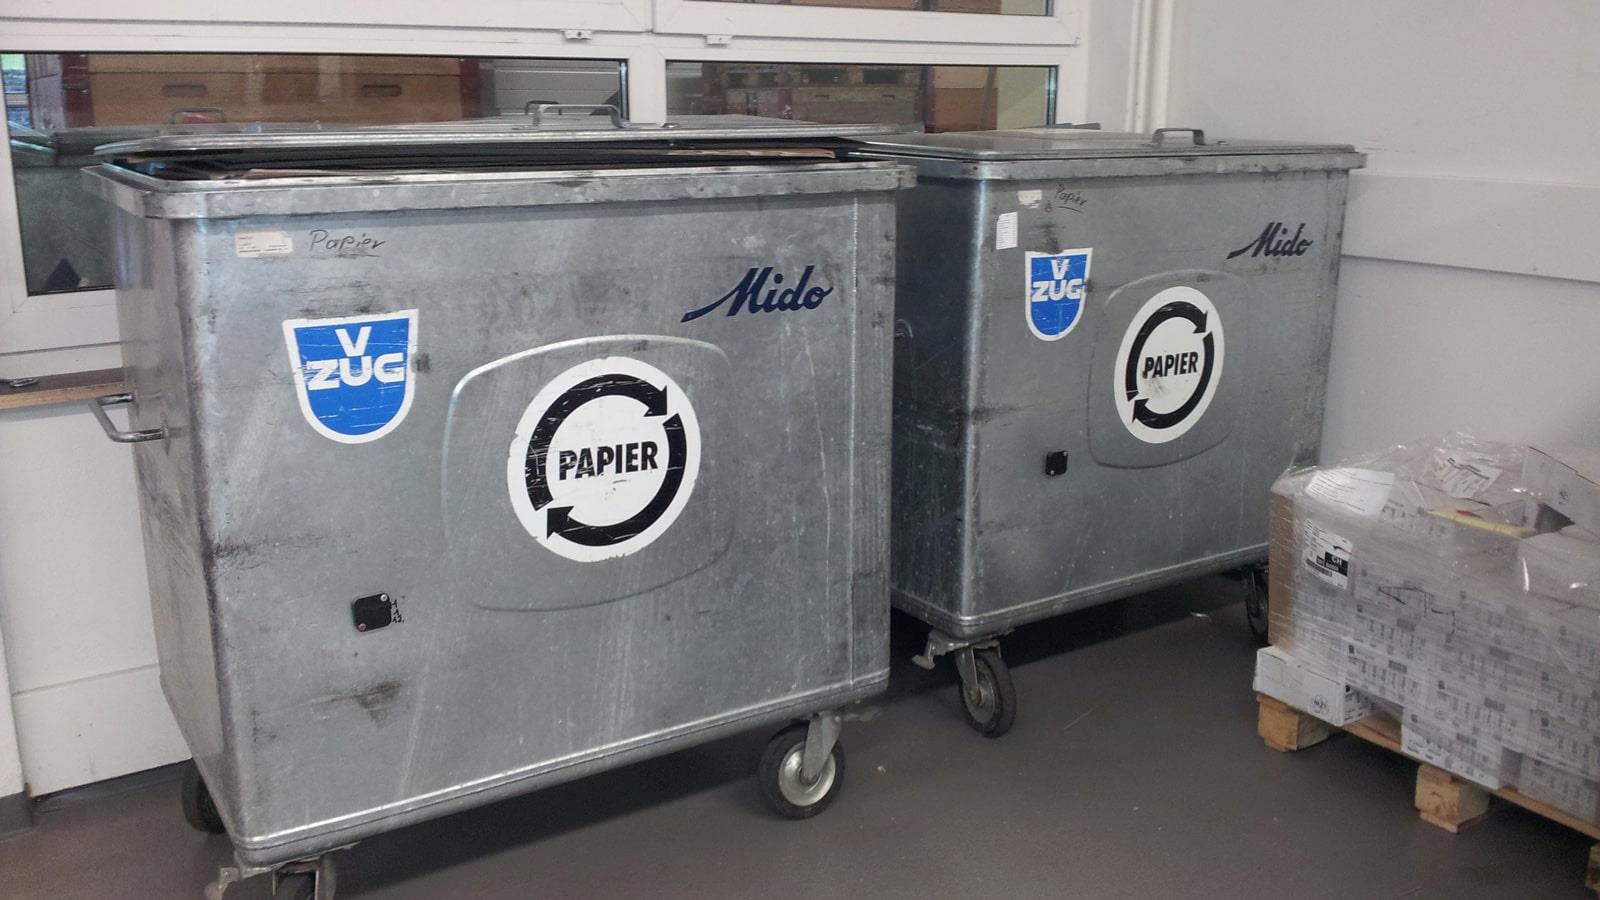 Two metal containers for recyclable paper waste